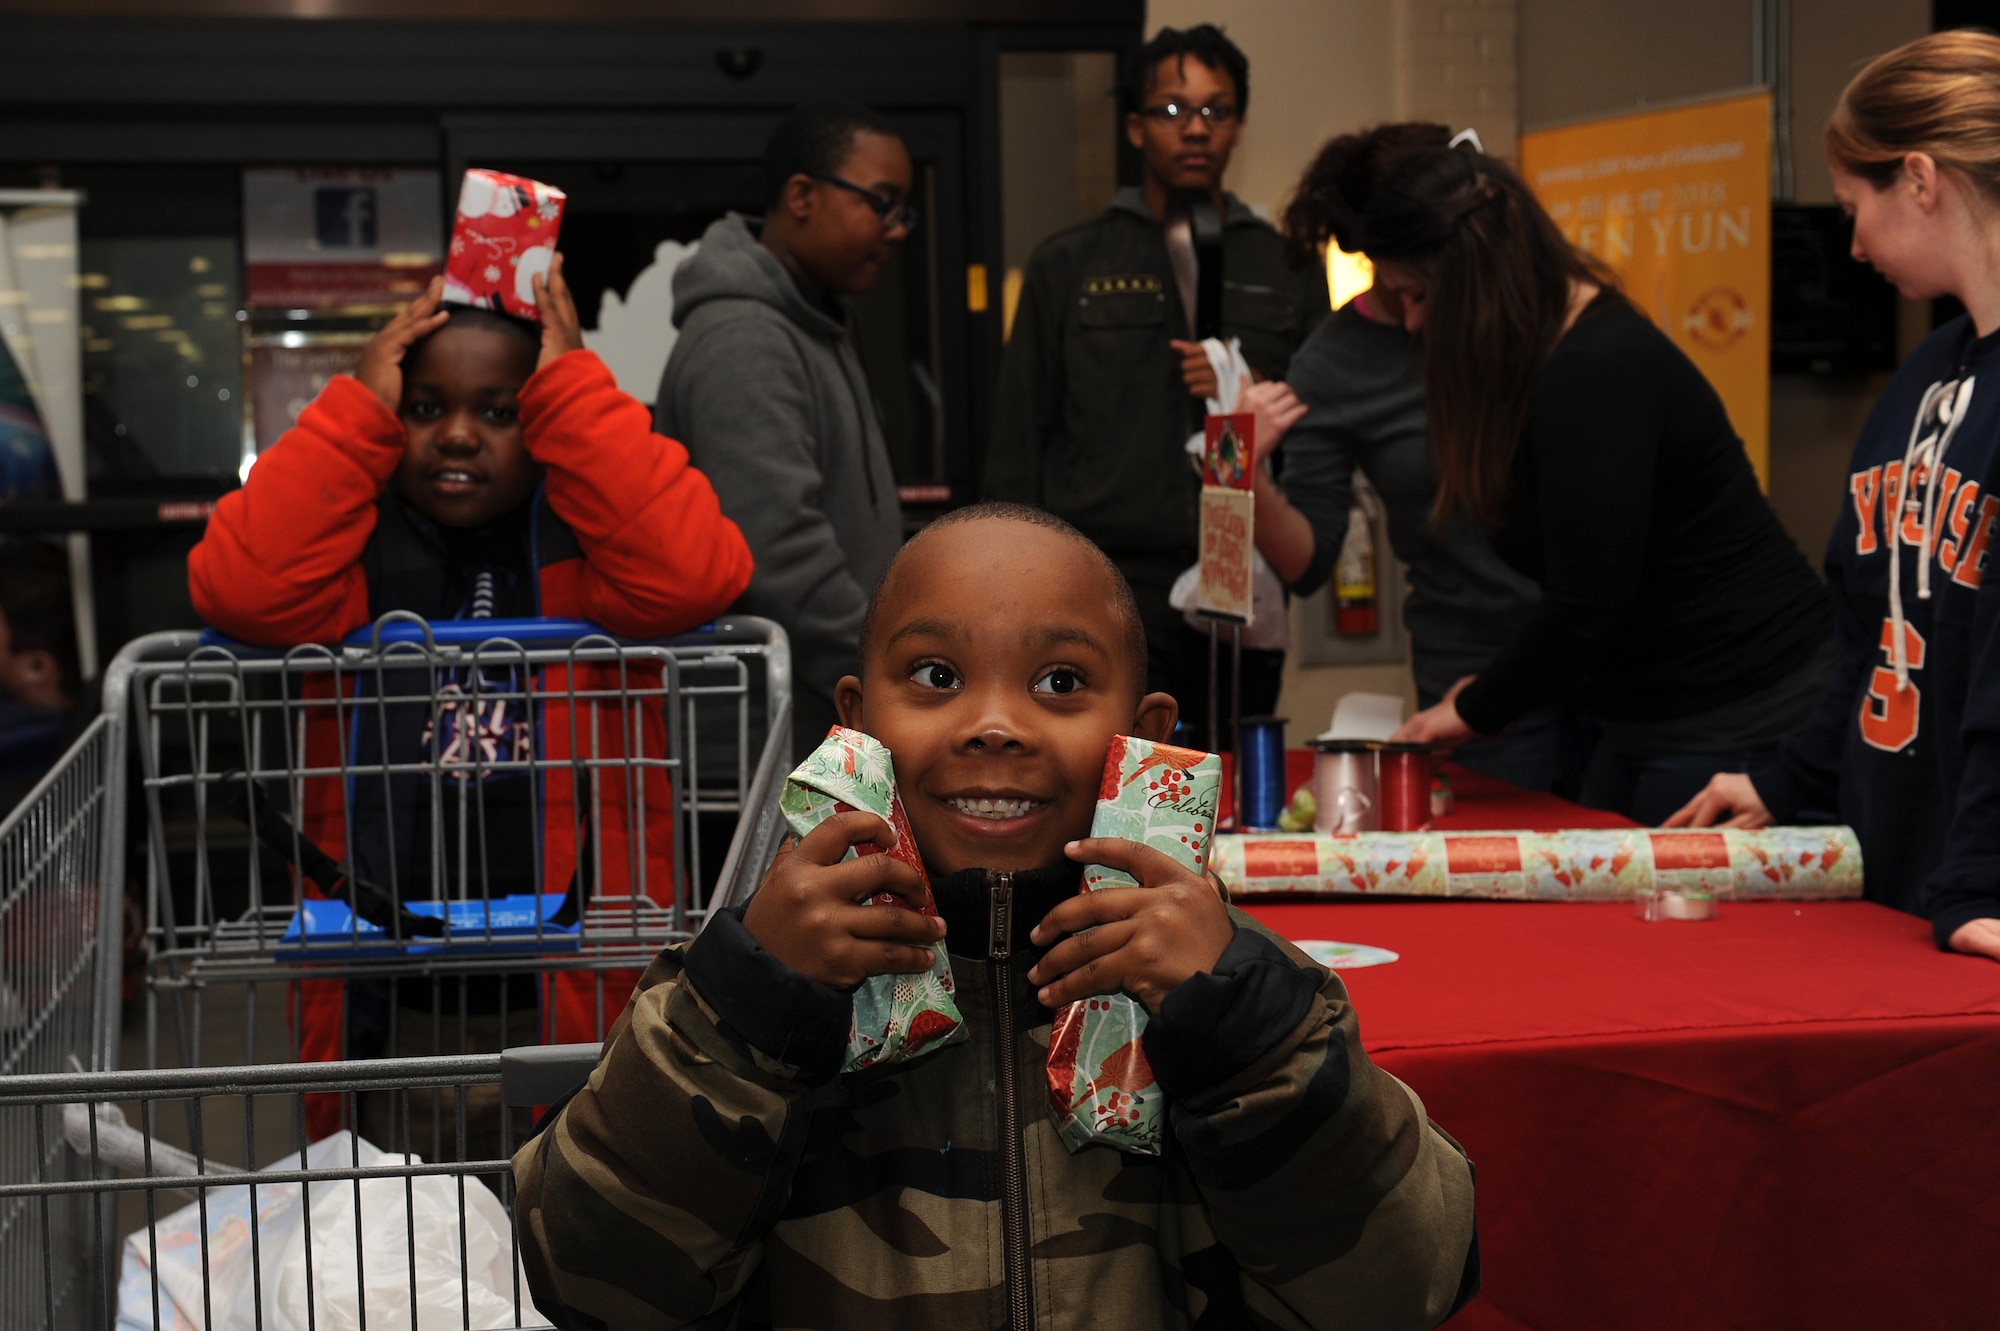 Chase Frost, age 8 and Noah Frost, age 6, local youth with The Up Center’s Team Up mentoring program, a non-profit organization in Hampton Roads, show-off gifts they purchased during the “Shop with a Cop” event at Joint Base Langley-Eustis, Va., Dec. 19, 2017.